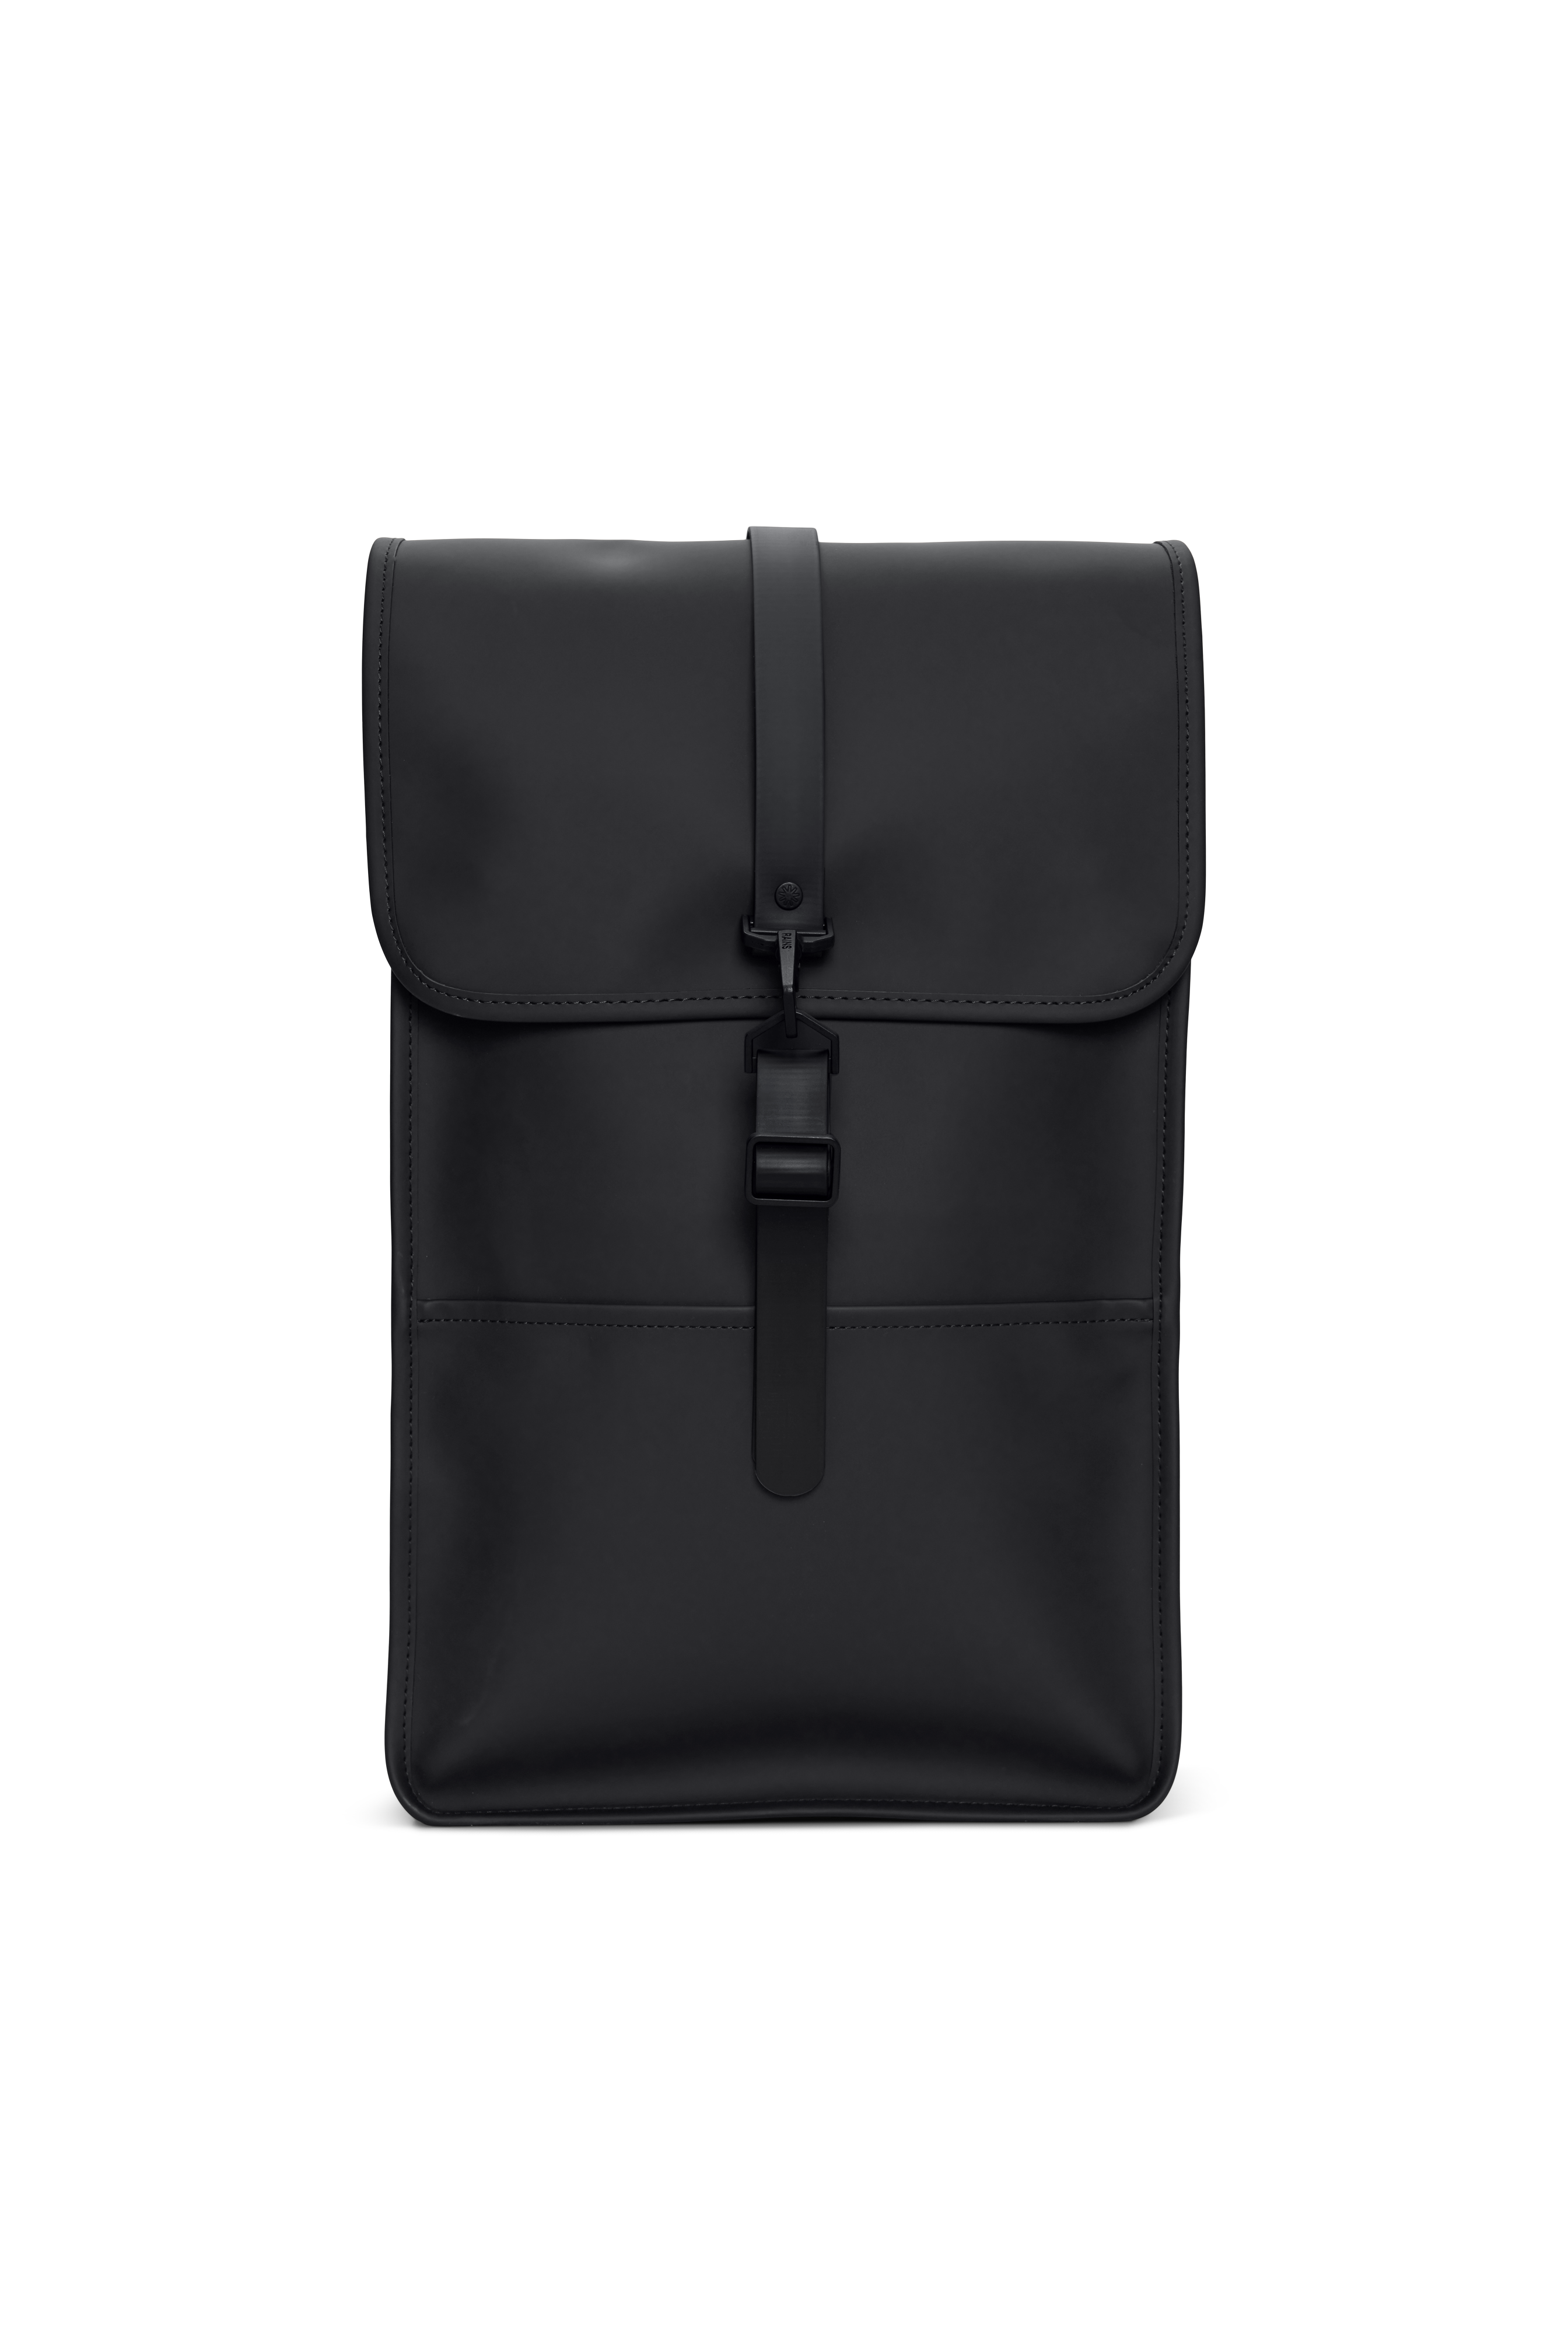 Rains® Backpack in Black for $180 | Free Shipping